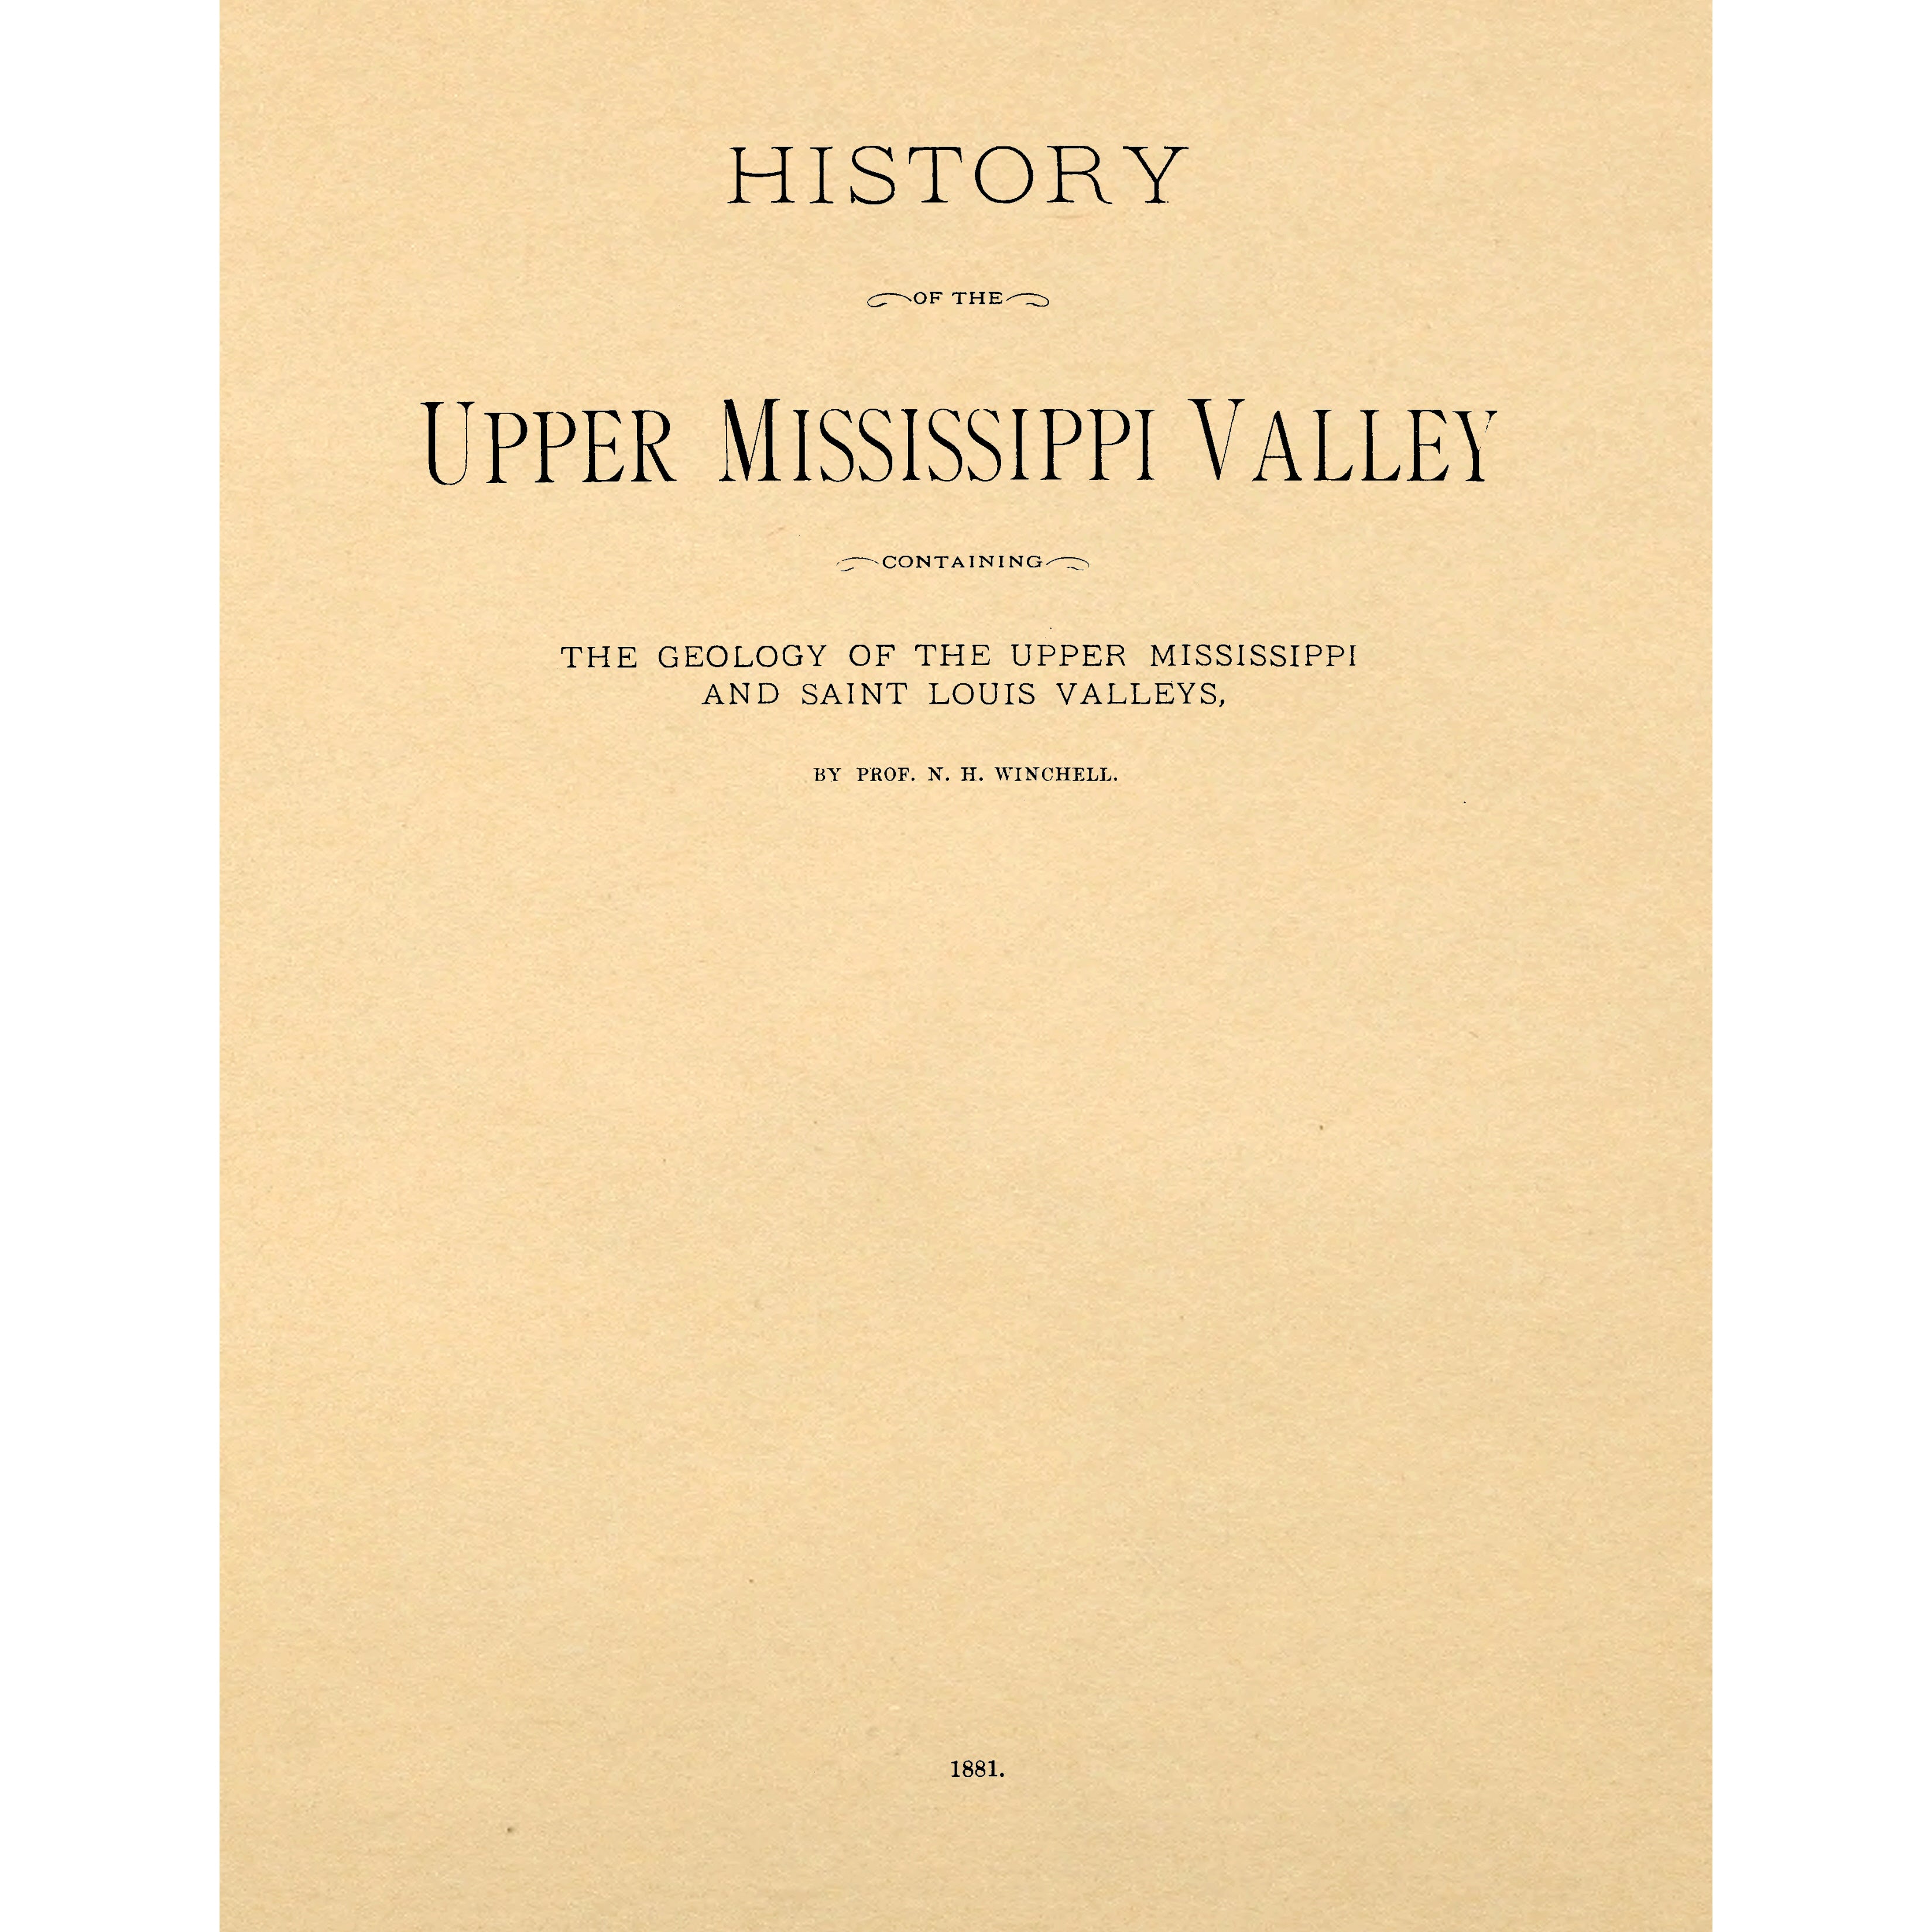 History of the upper Mississippi Valley